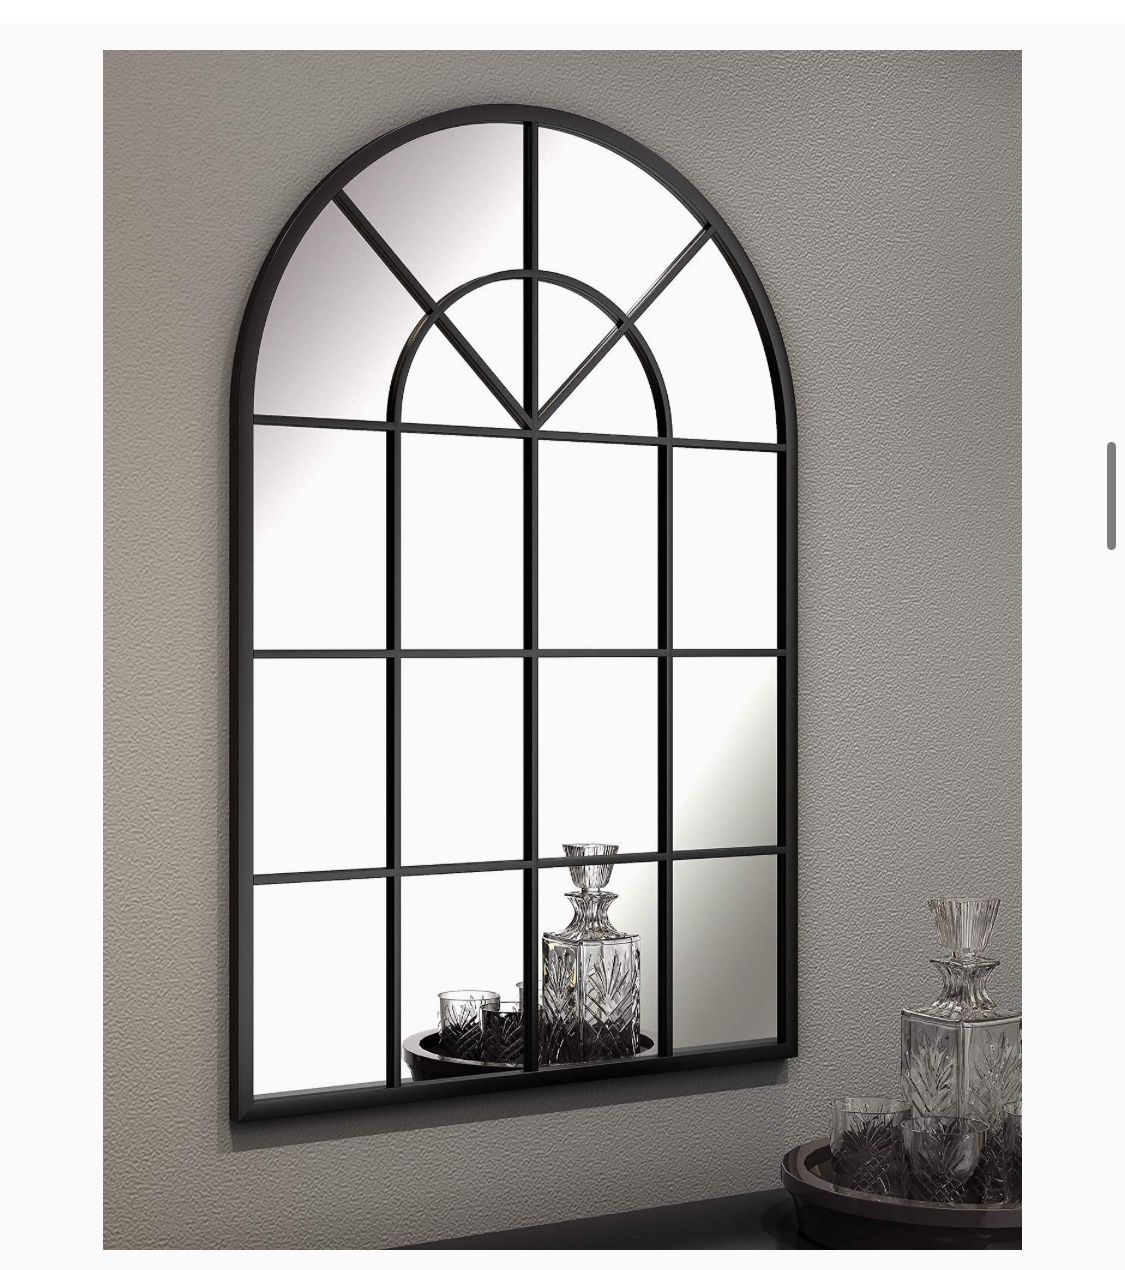 Black Arched Window Wall Mirror 32X46 in